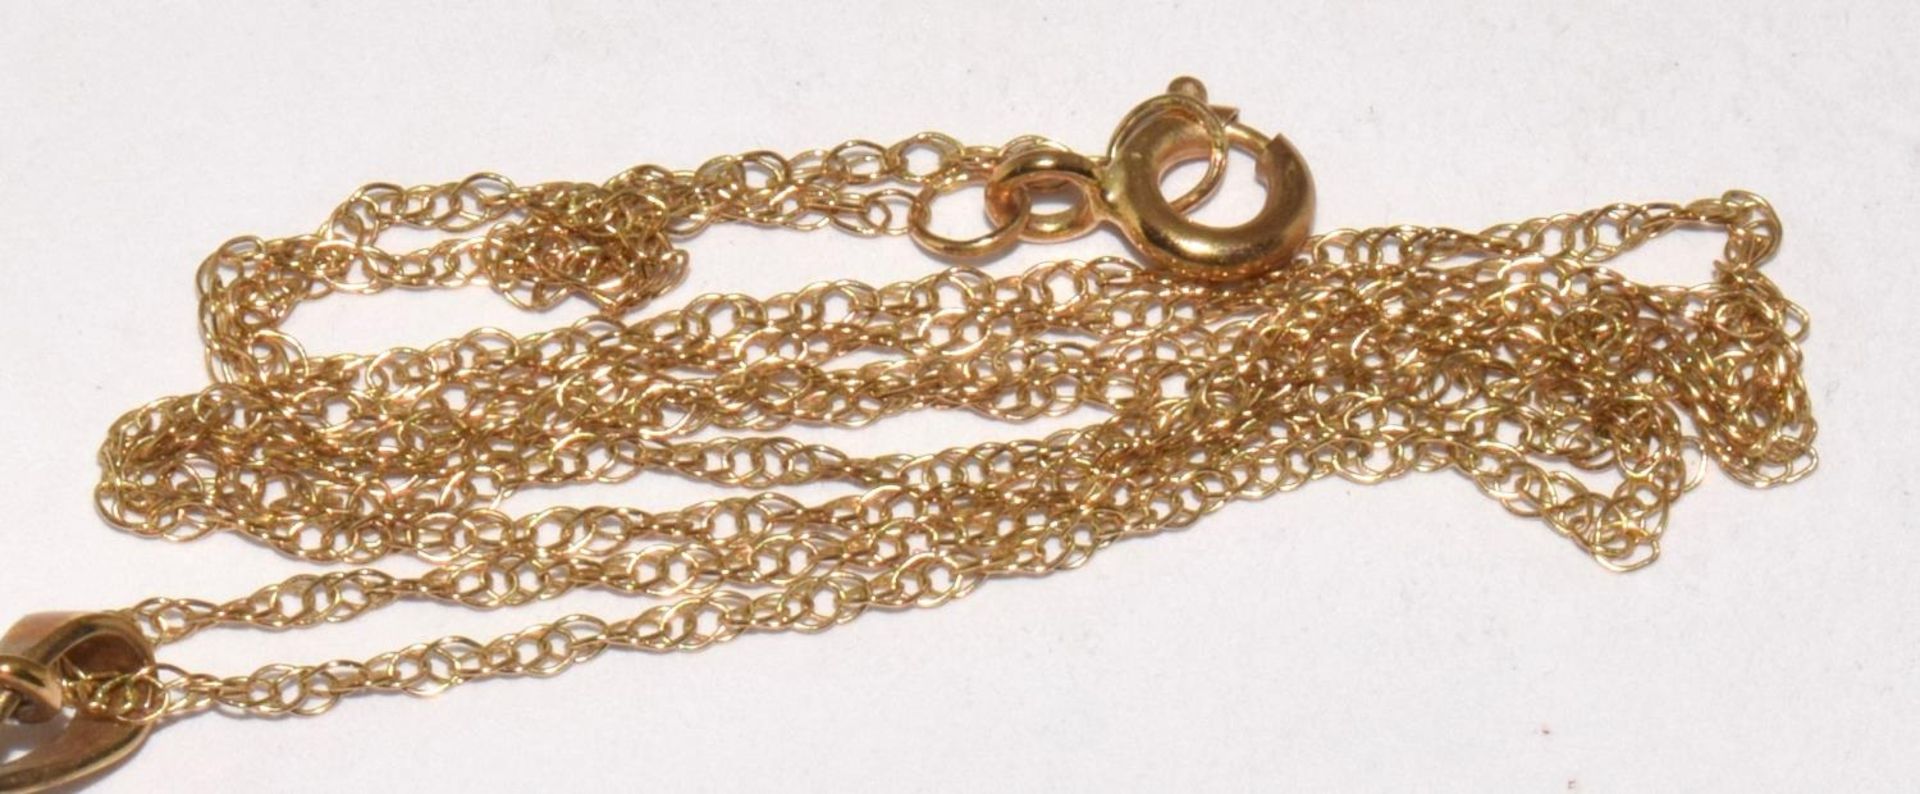 9ct gold Diamond and Prasolite Necklace and earrings suite of jewellery chain 46cm long - Image 5 of 8